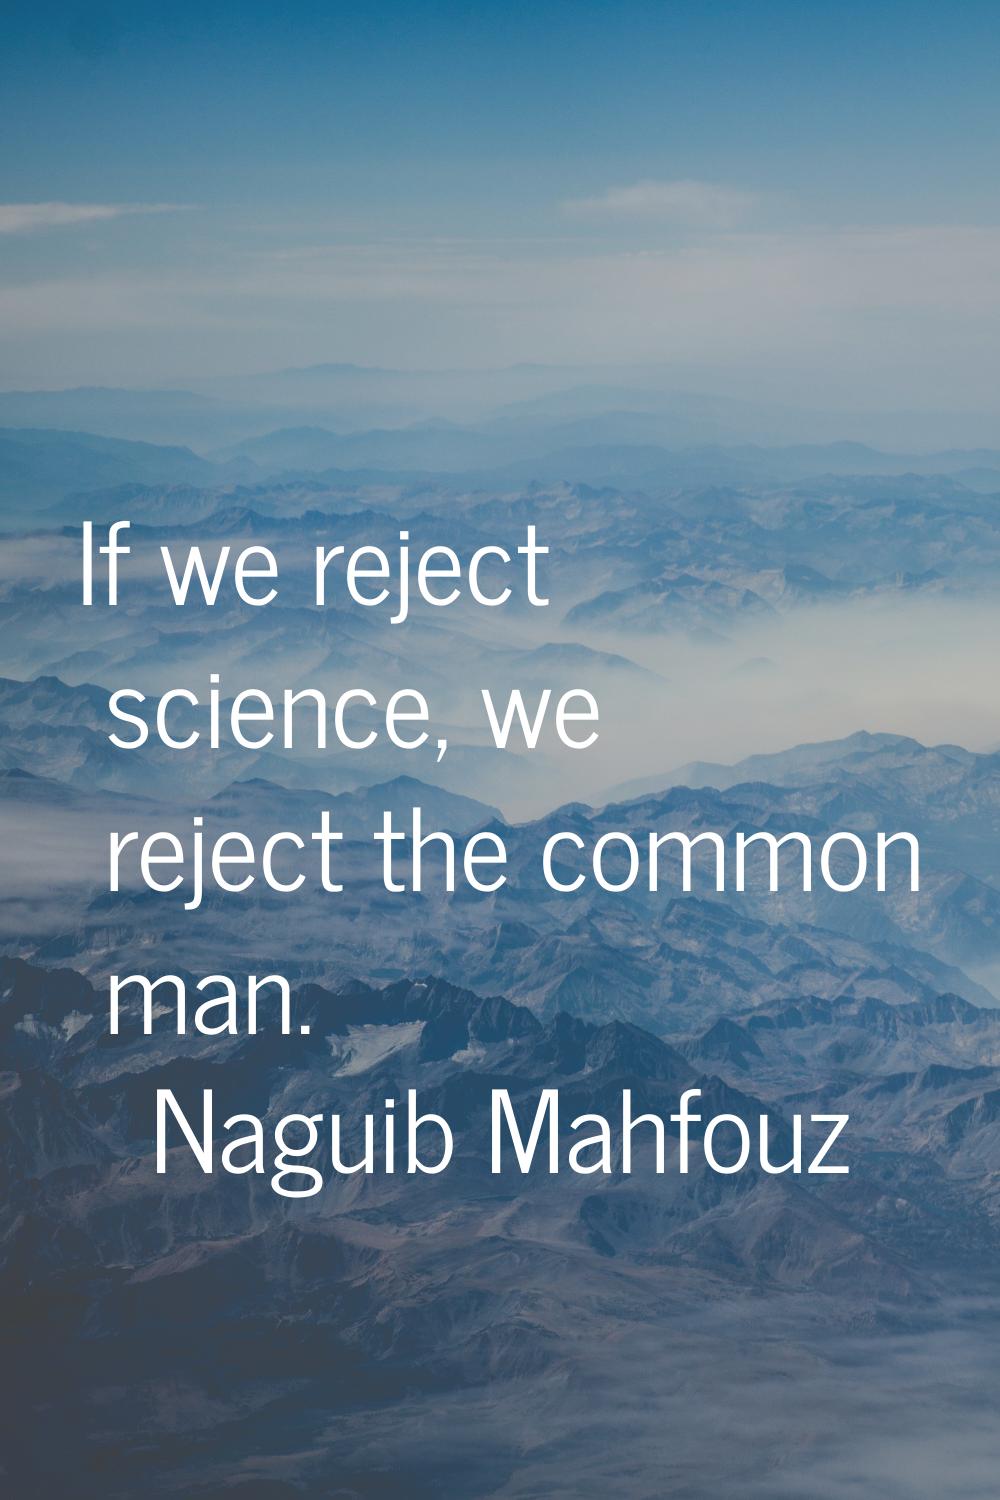 If we reject science, we reject the common man.